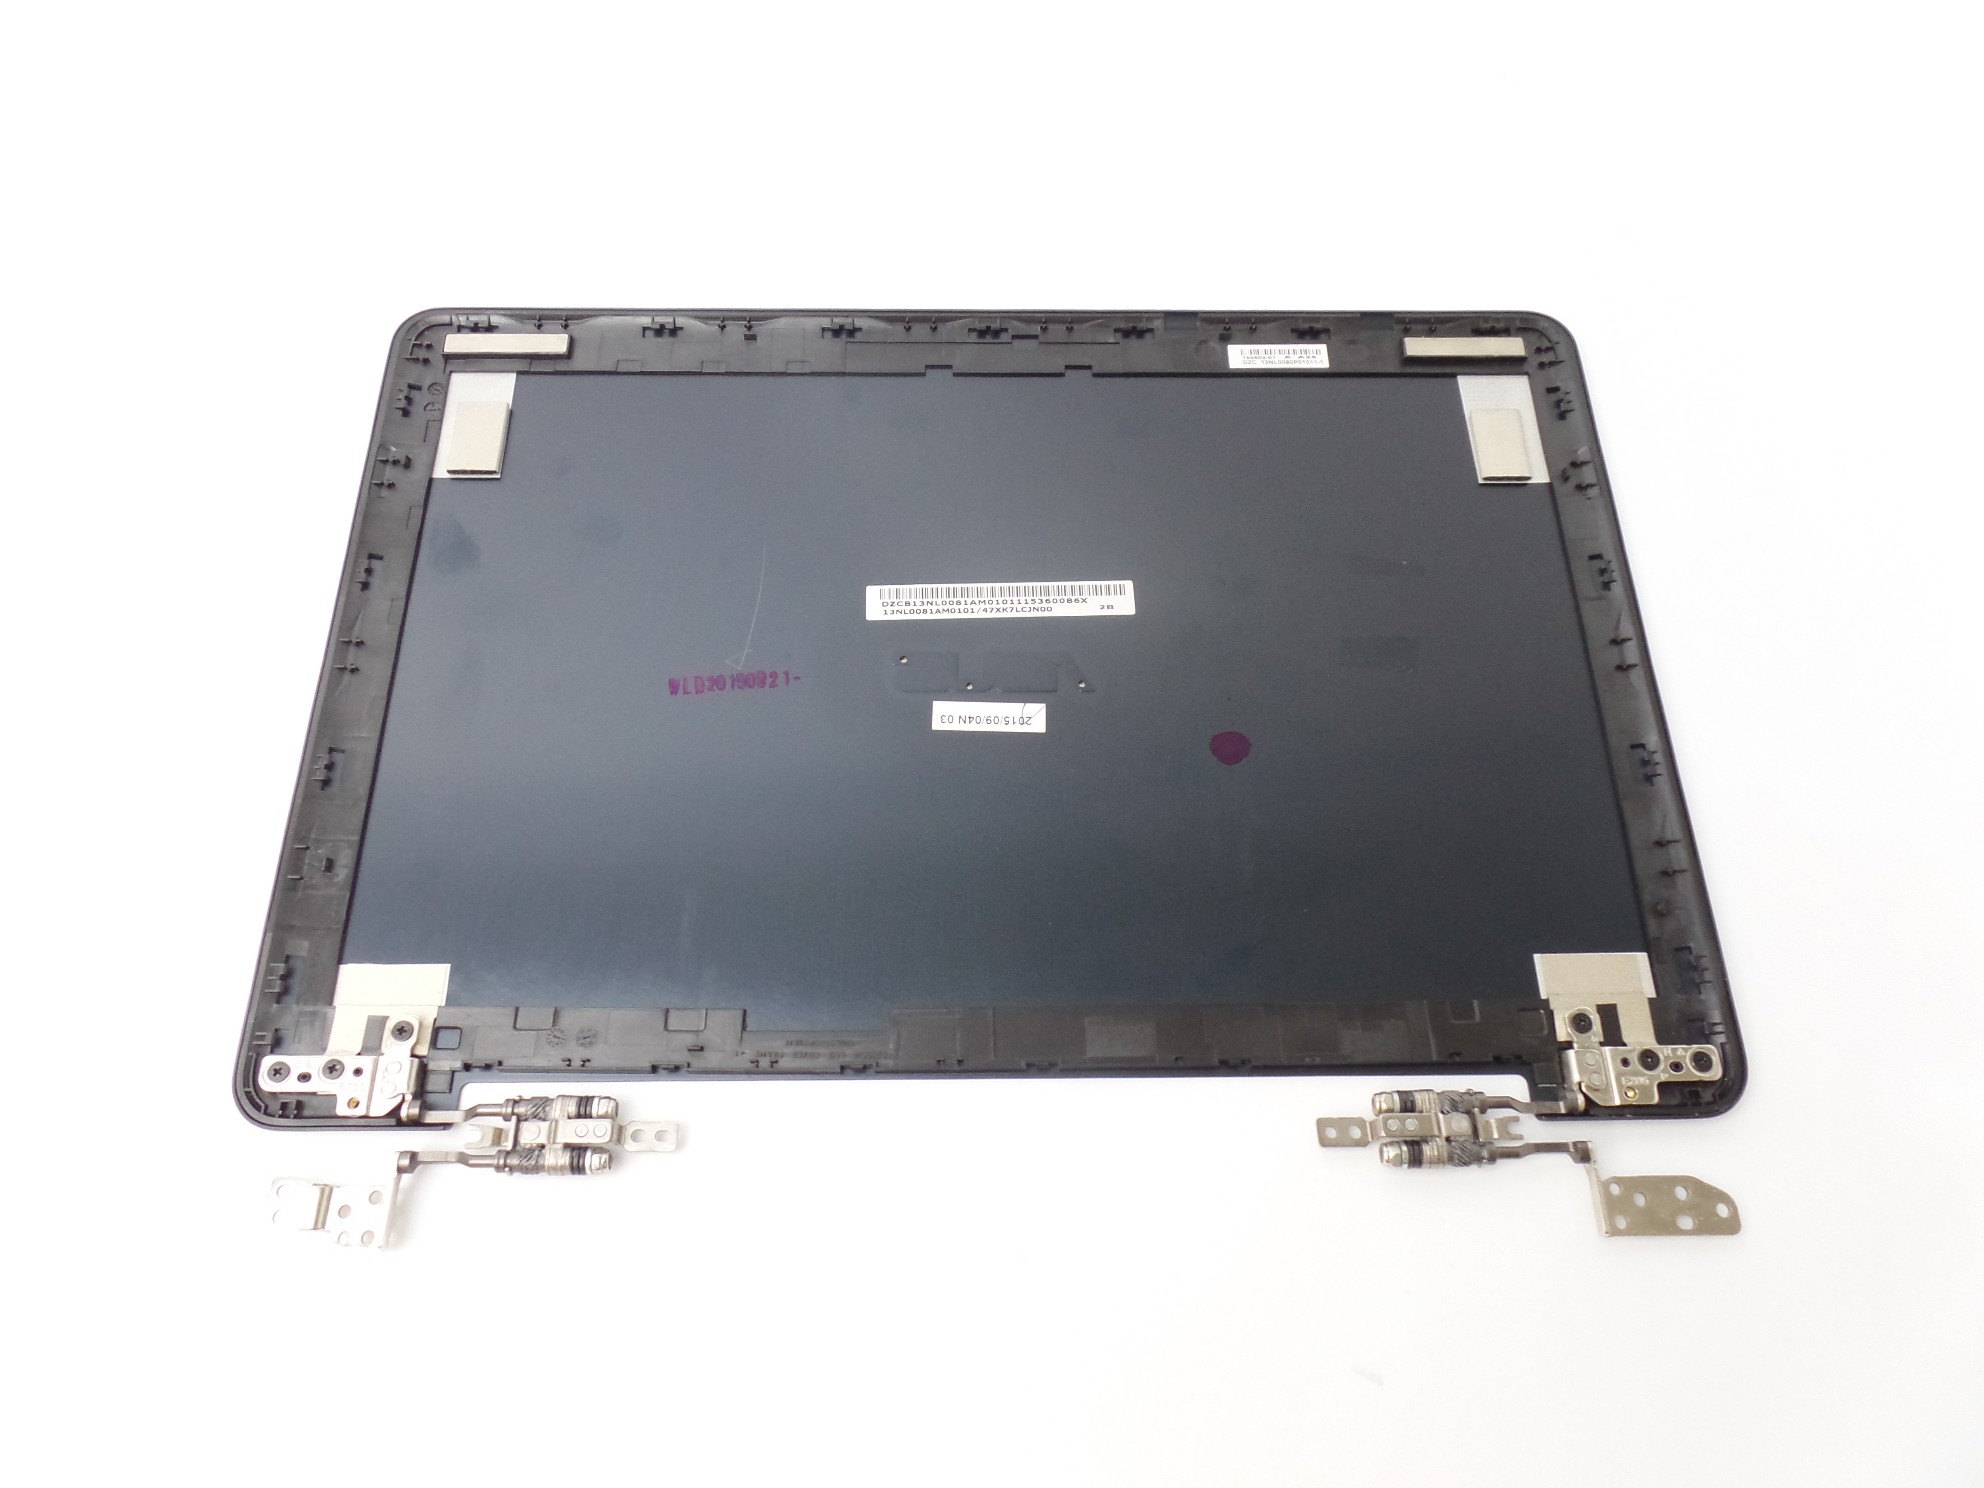 LCD Top Cover with Hinges for Asus TP200S TP200 13NL0081AM0101 U